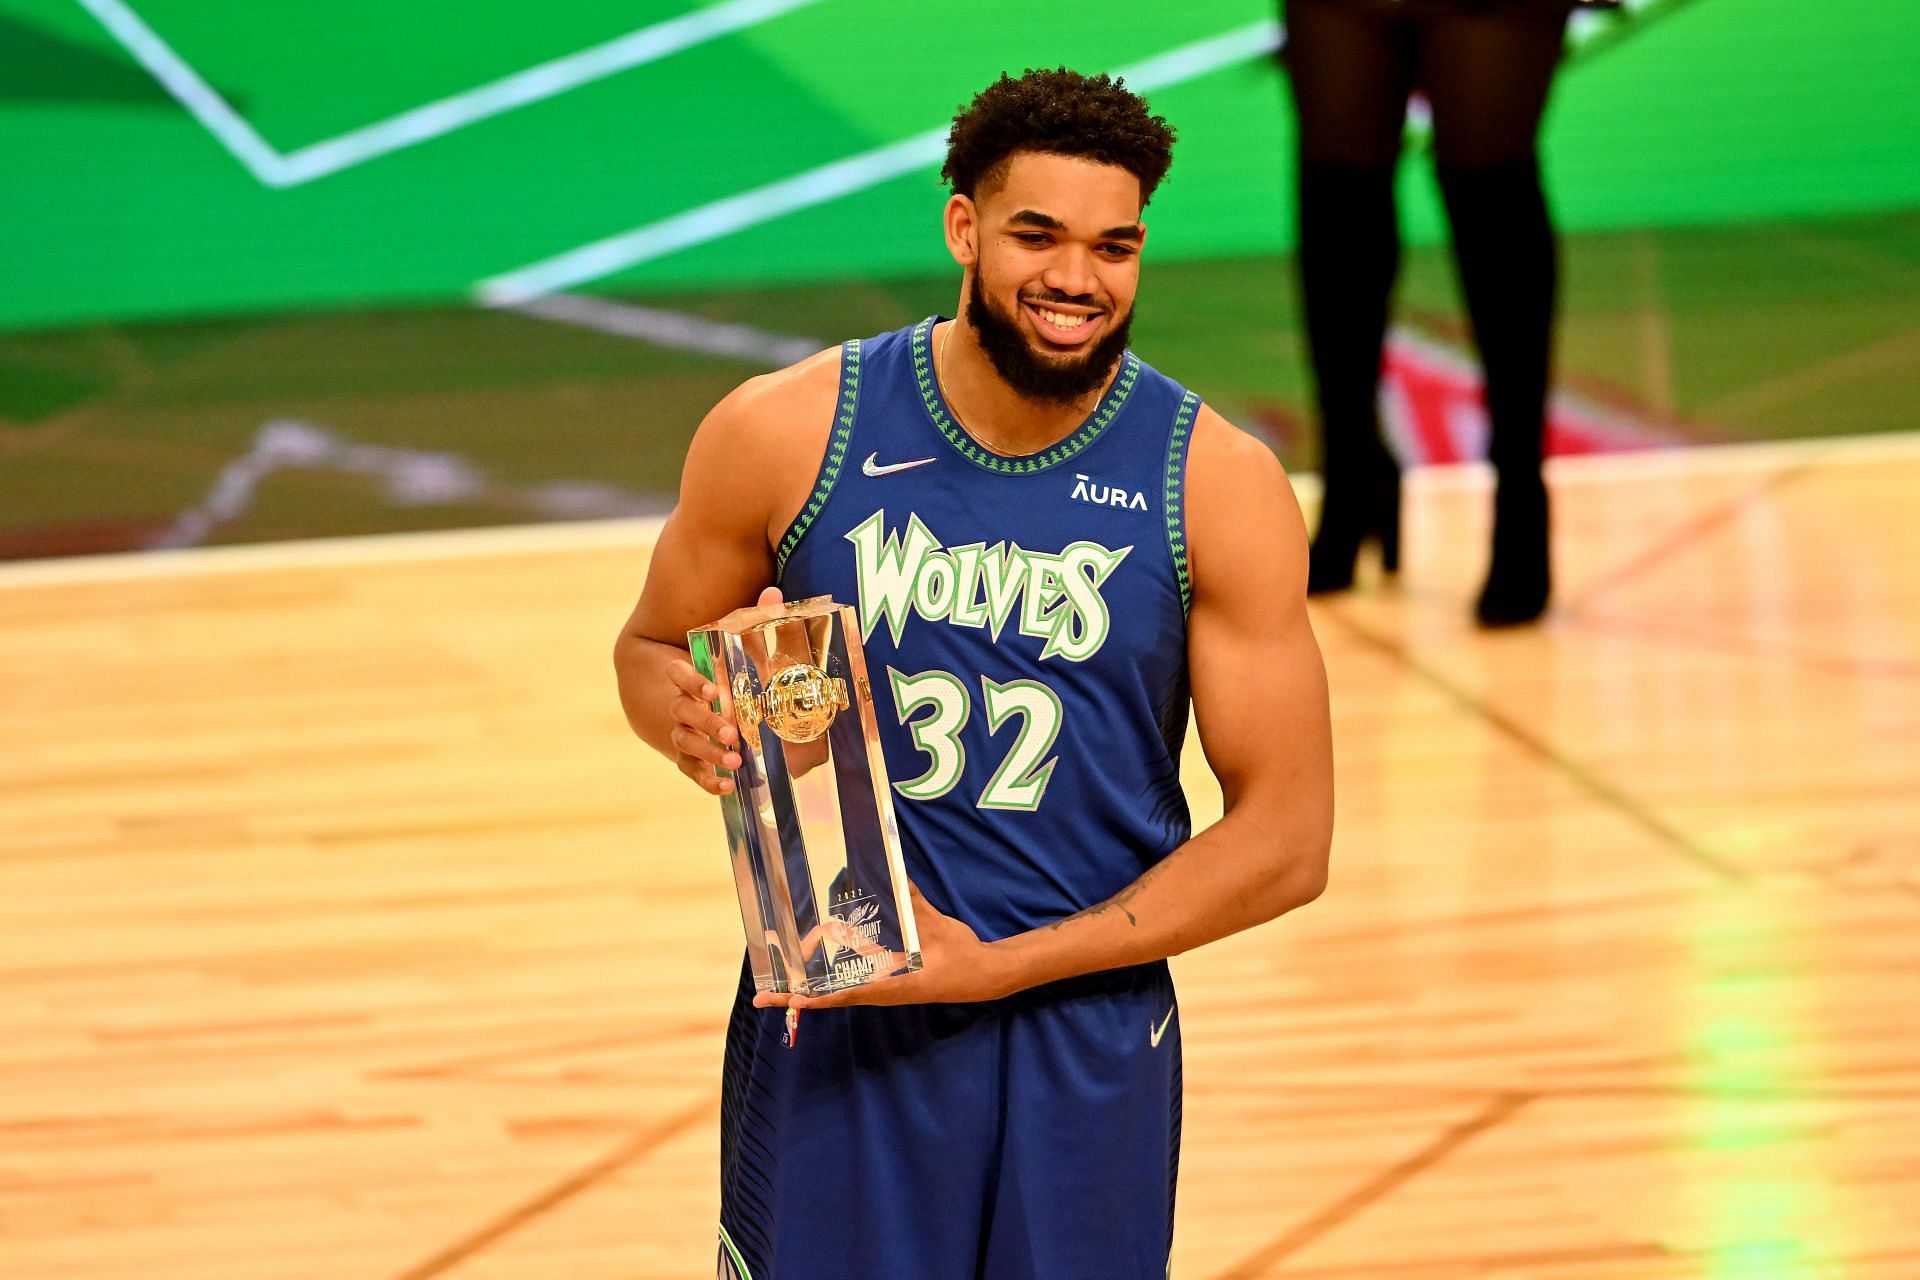 Karl-Anthony Towns of the Minnesota Timberwolves holds the trophy after winning the 3-Point Contest